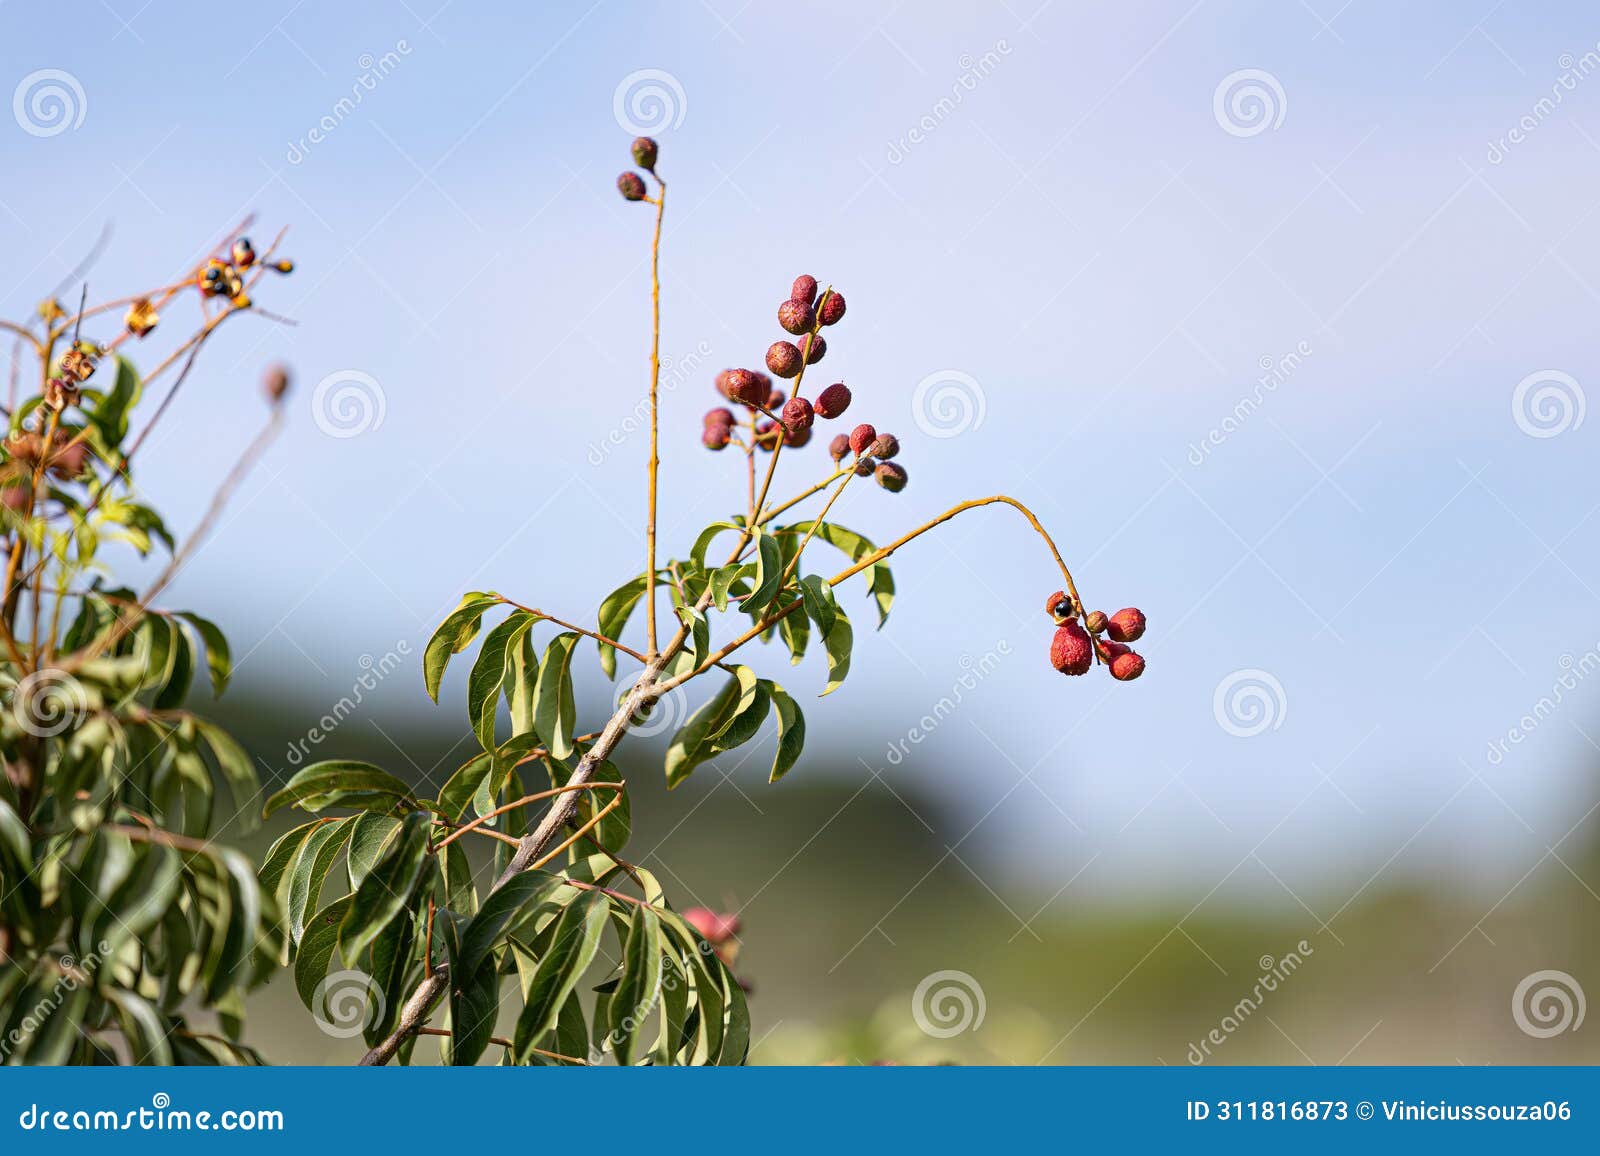 small red berries of angiosperm plant